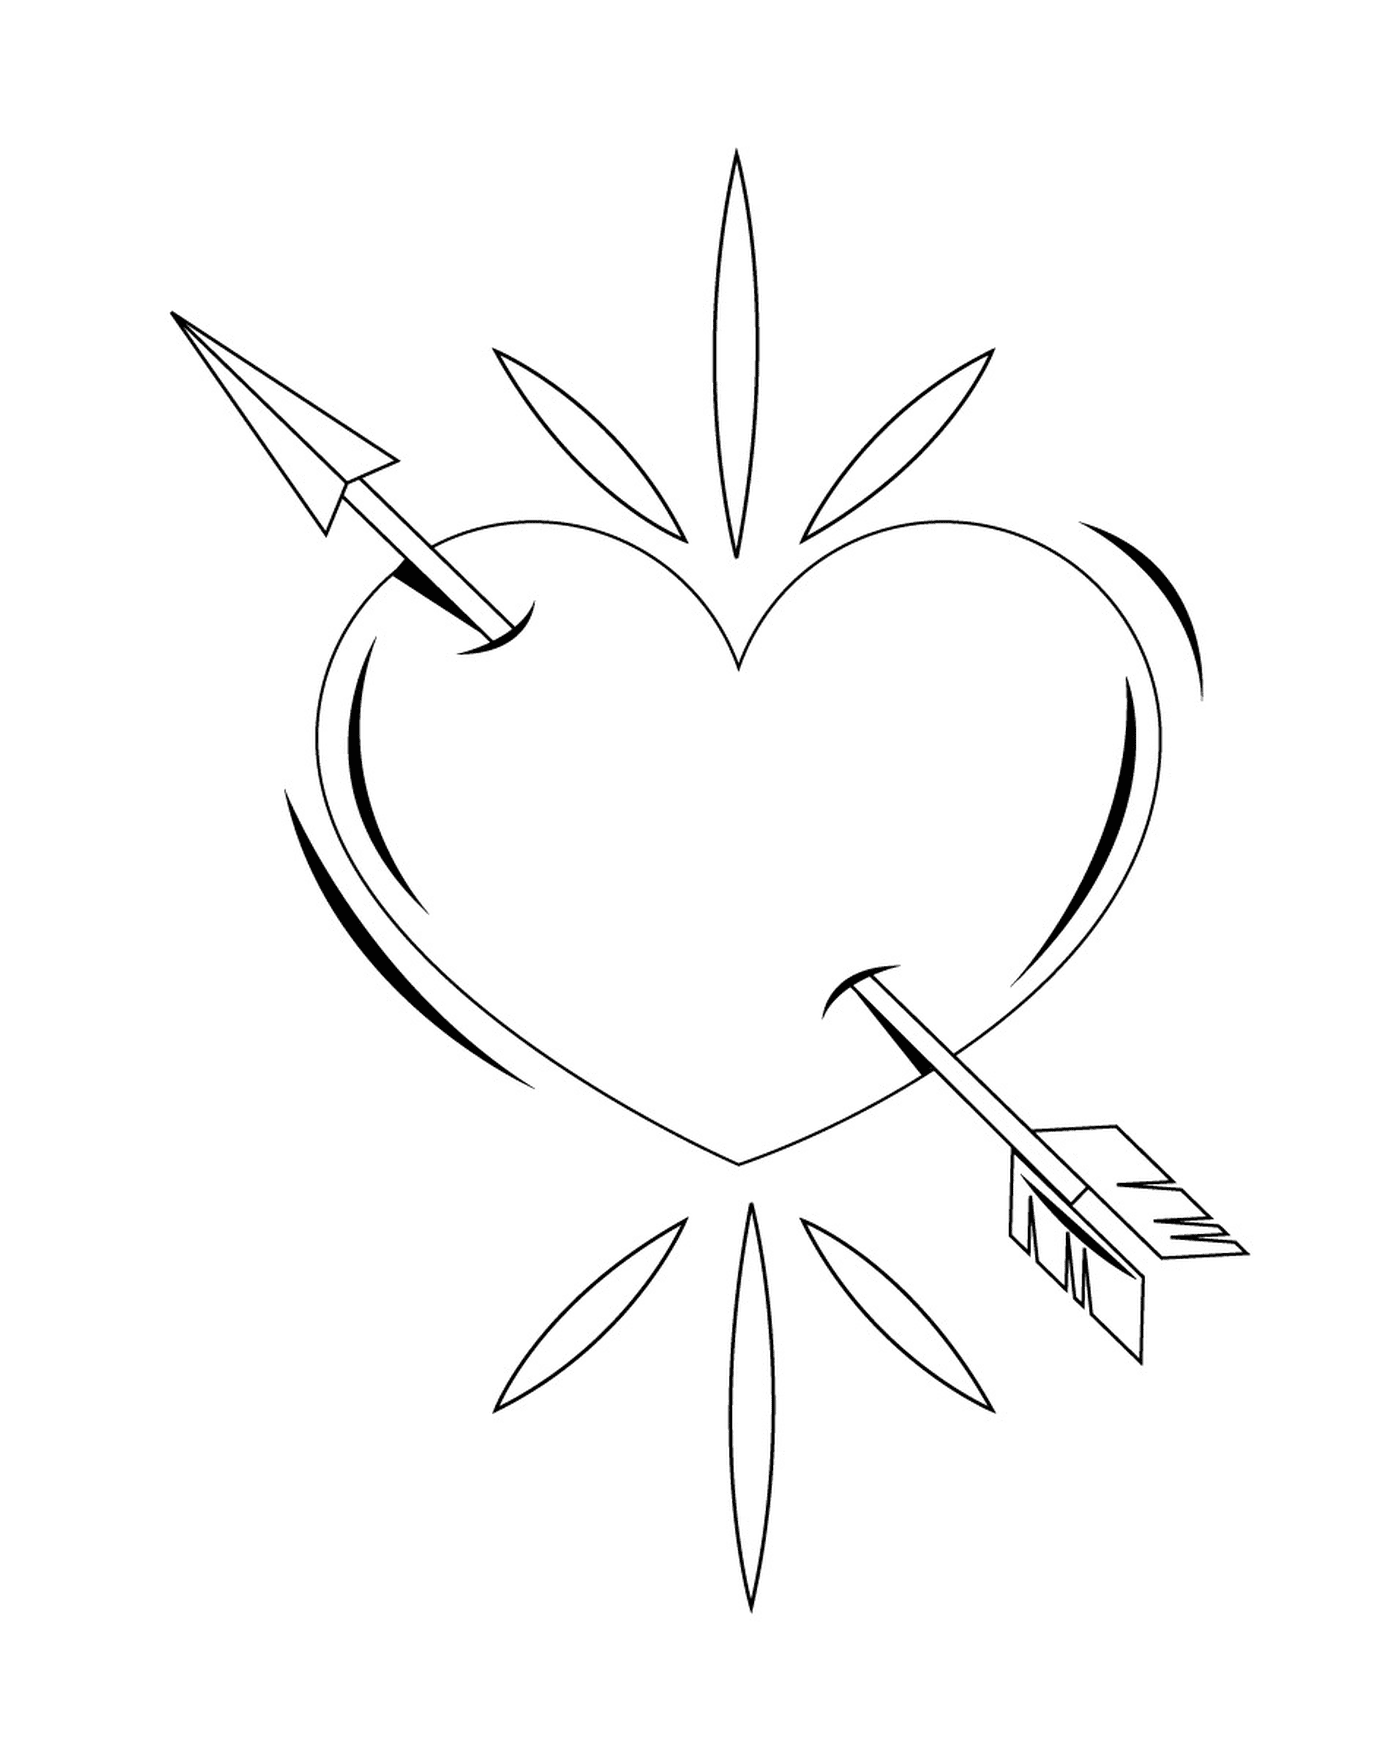  Heart of love with an arrow, a black drawing 